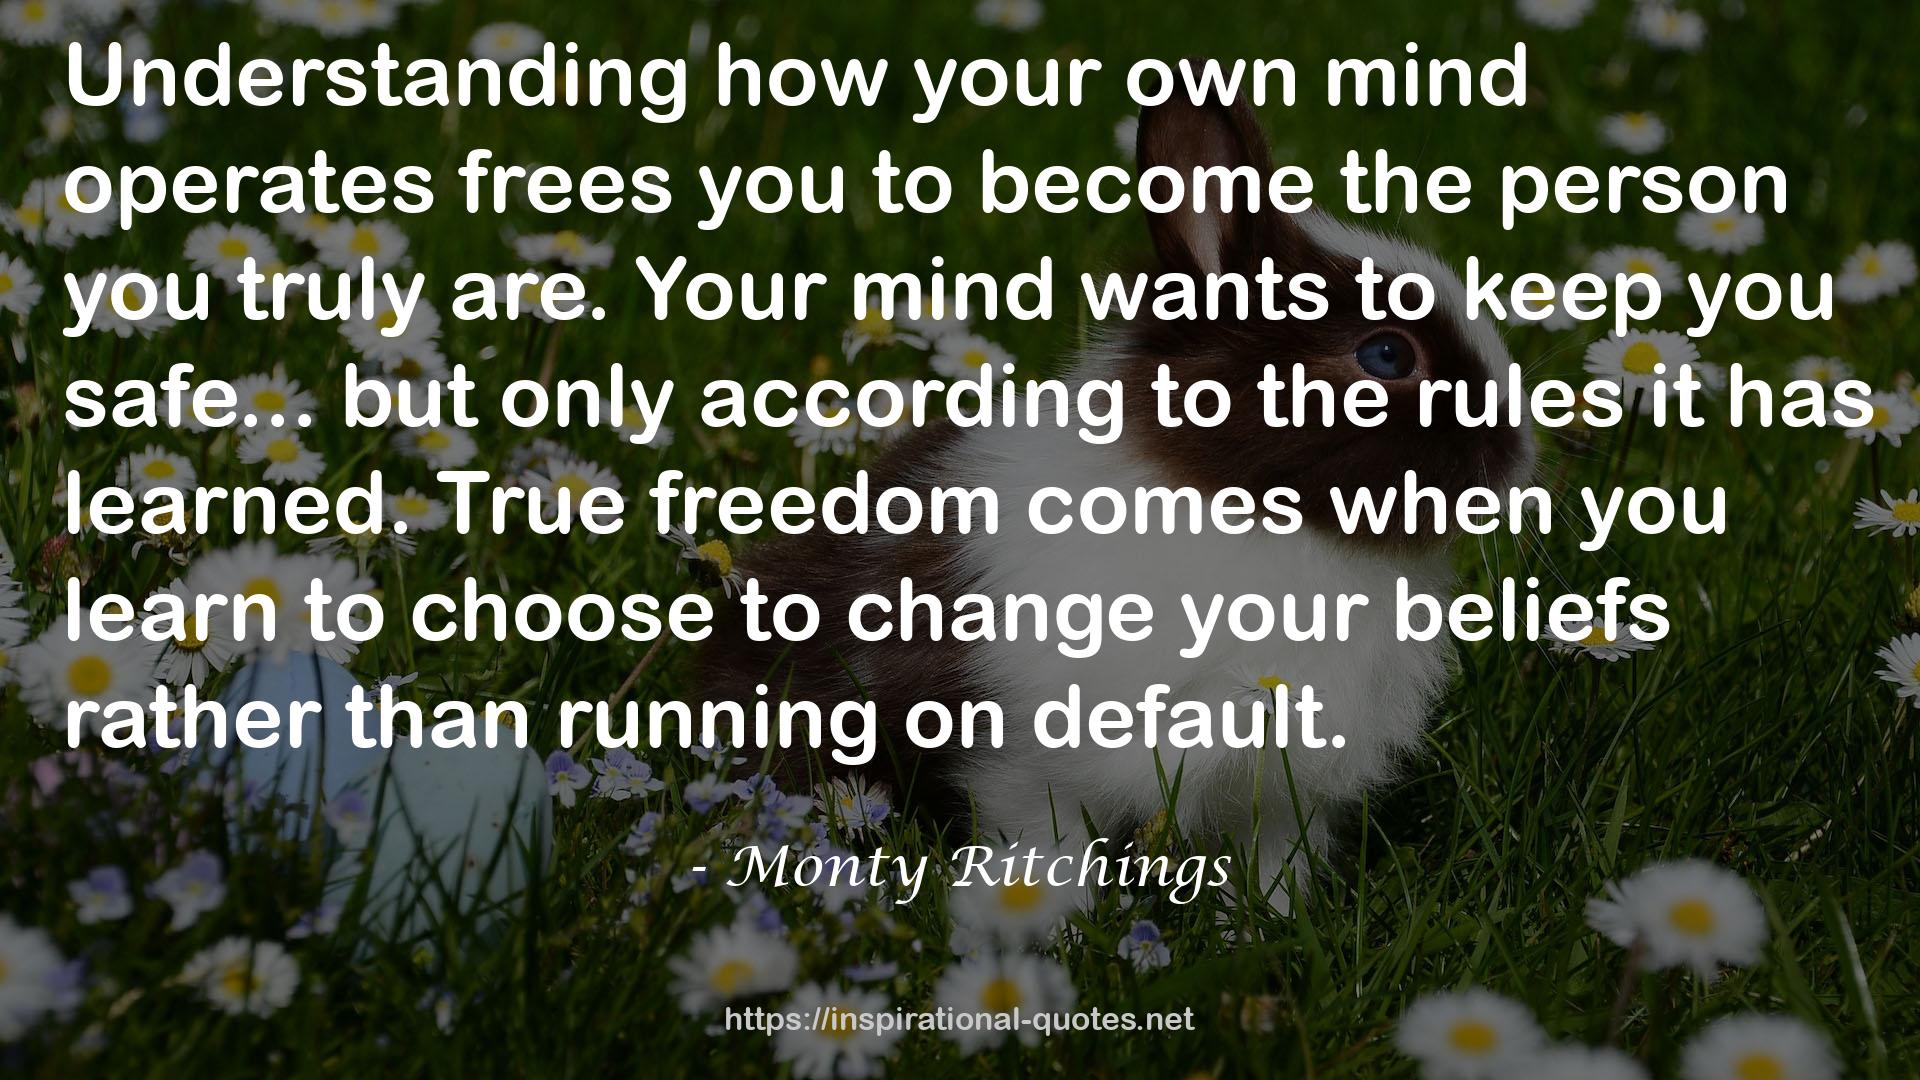 Monty Ritchings QUOTES